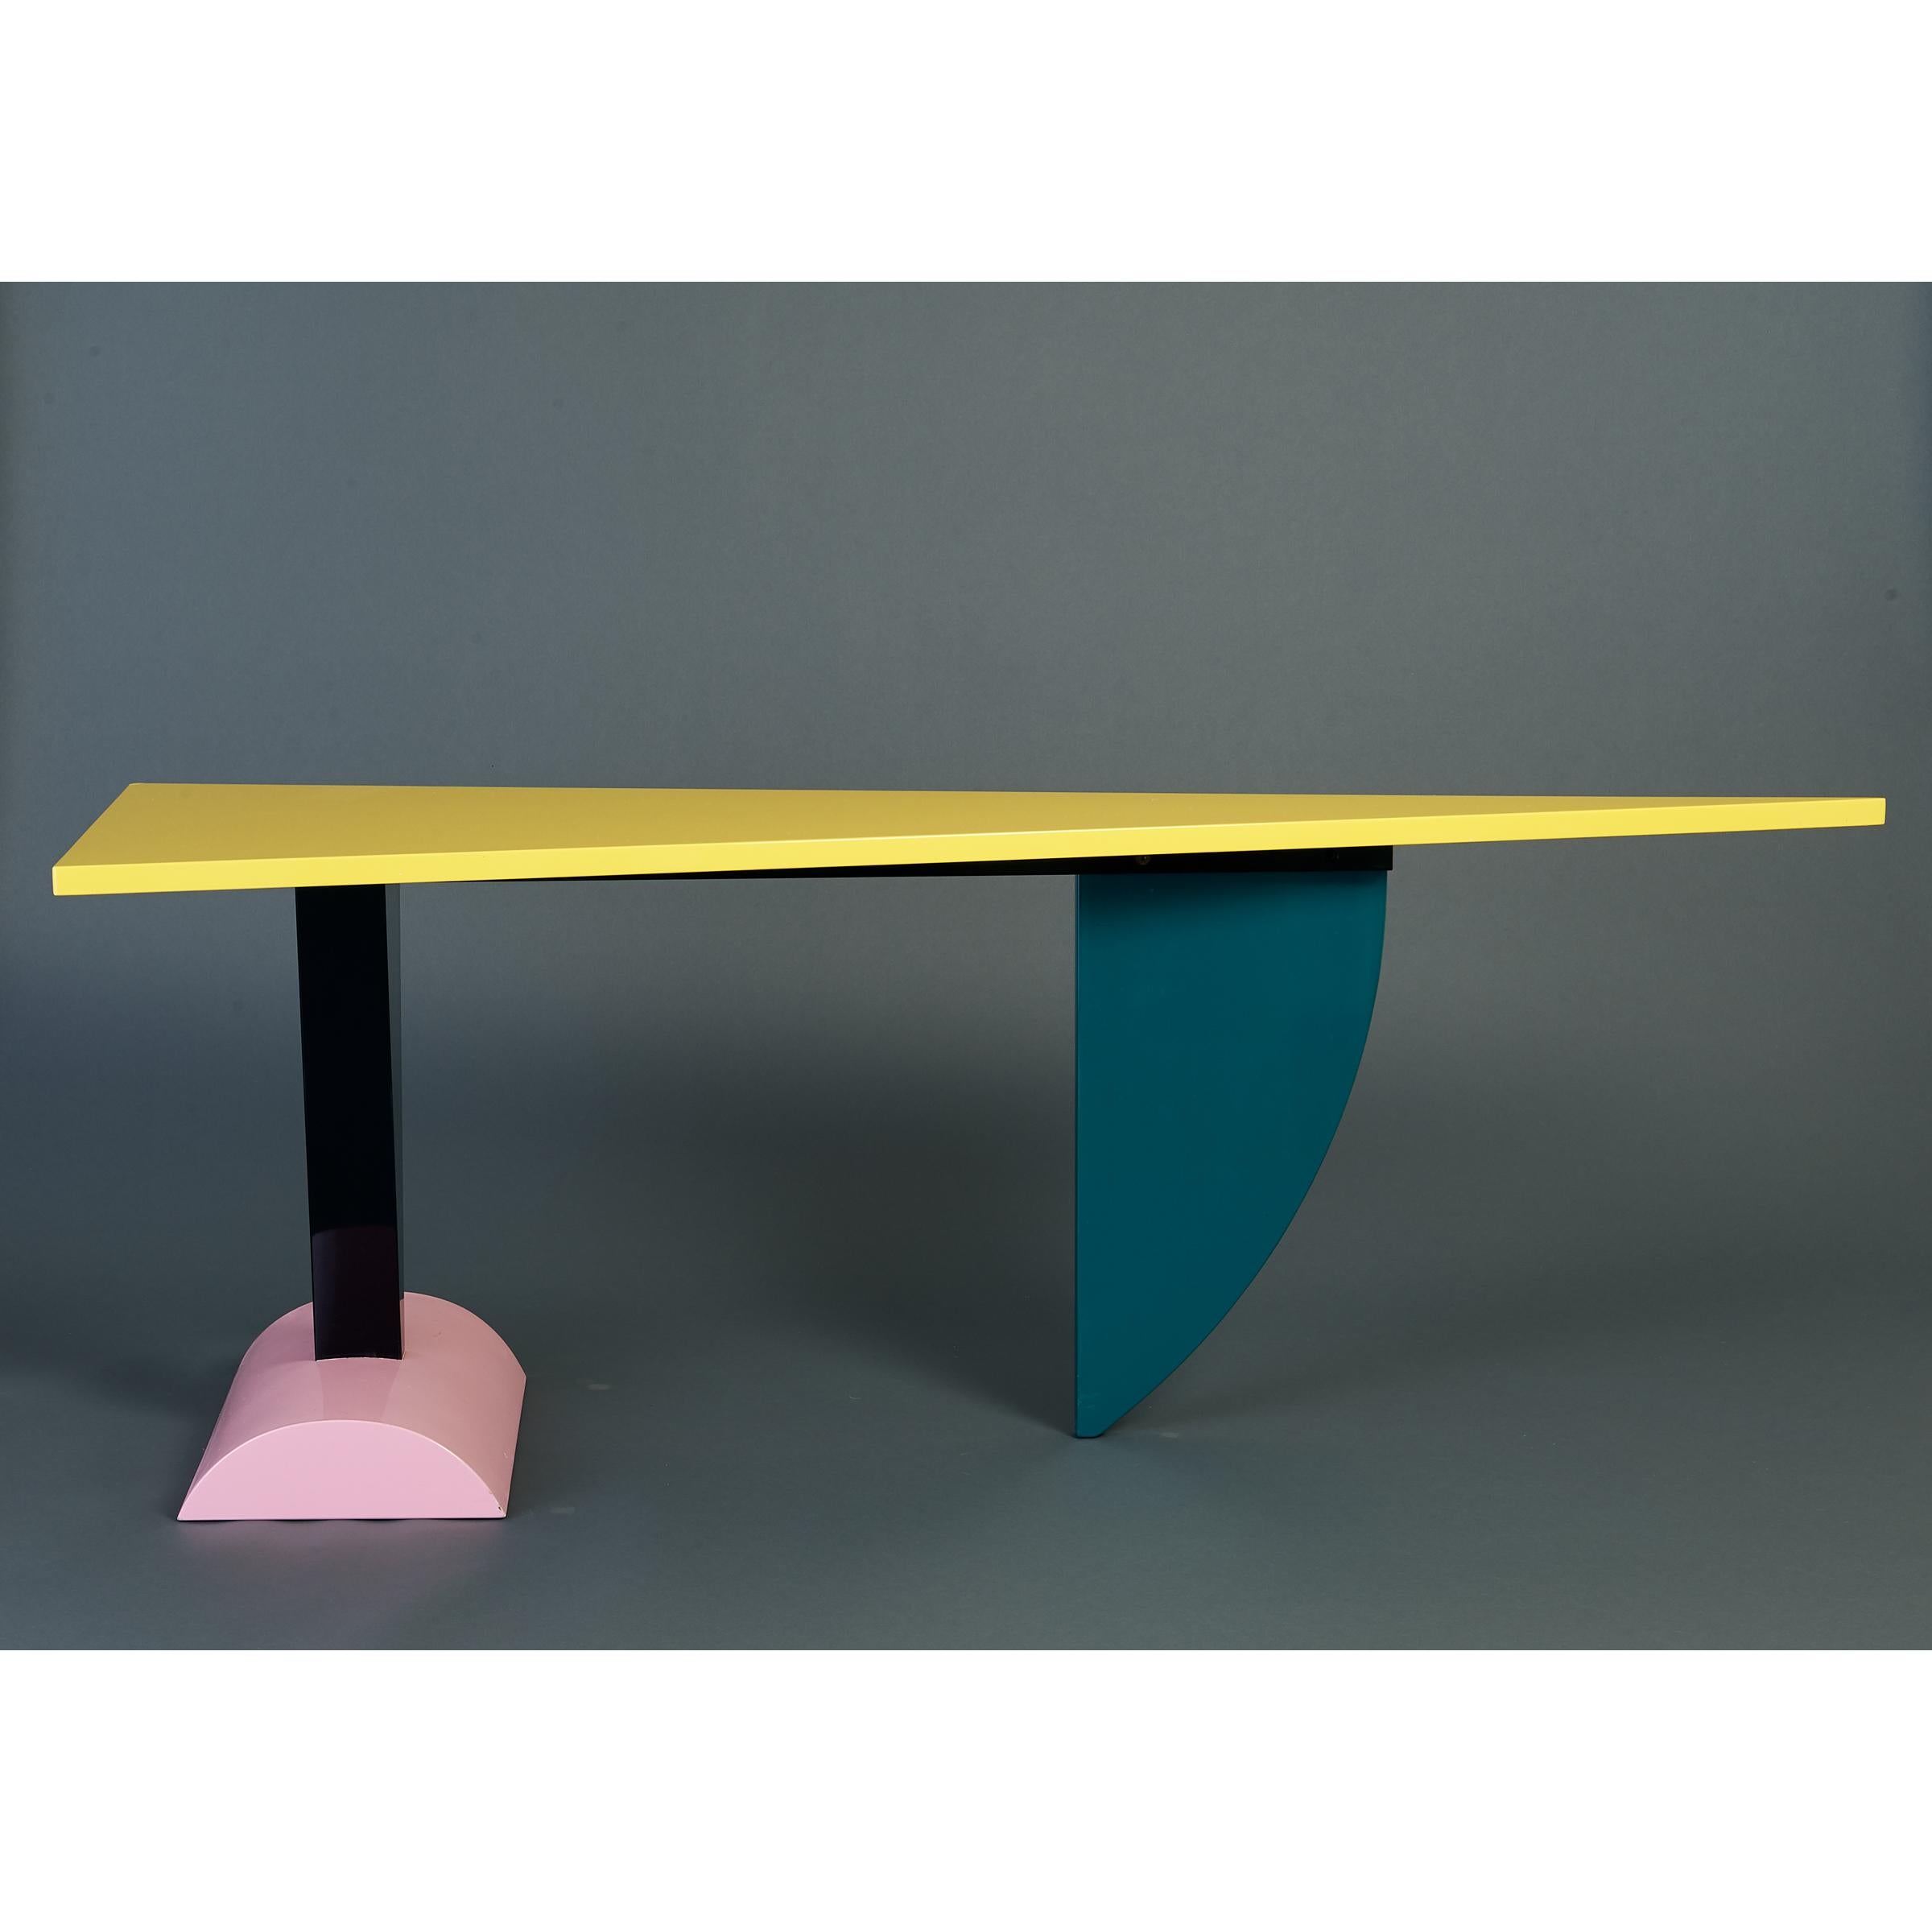 Mid-Century Modern Peter Shire: Original Memphis Milano Brazil Table in Lacquered Wood, Italy 1981 For Sale